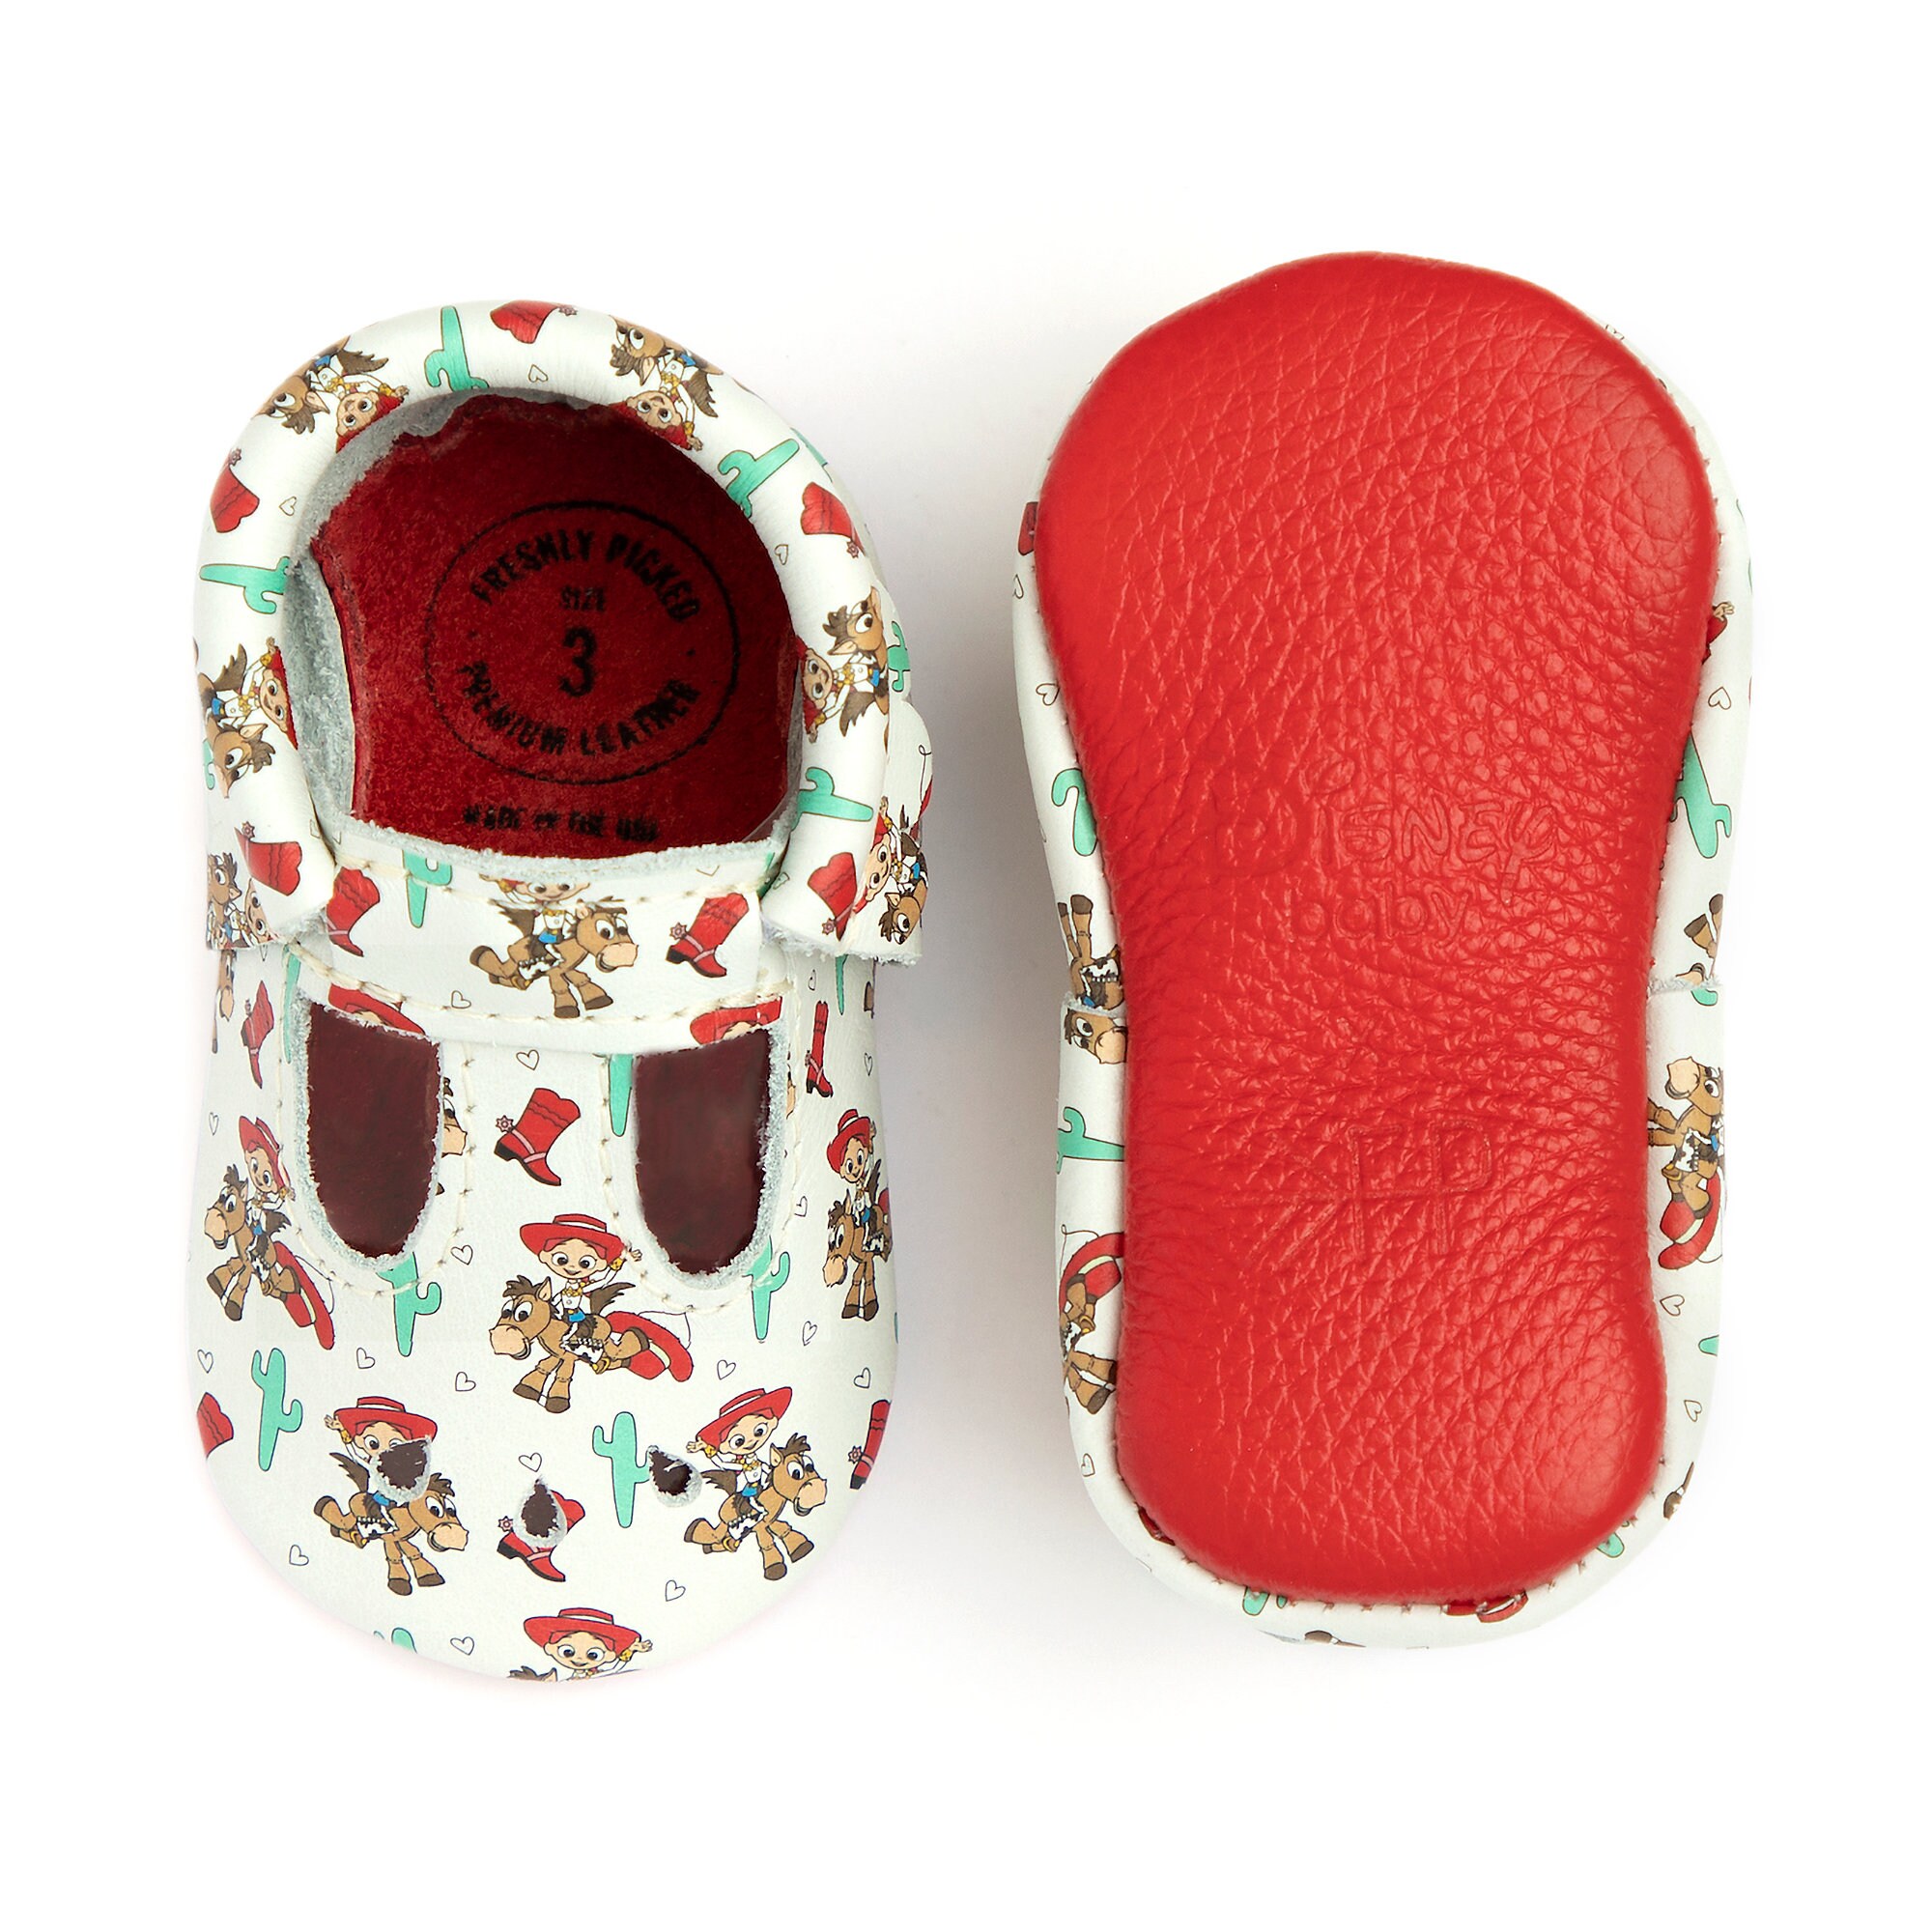 Jessie and Bullseye Mary Jane Moccasins for Baby by Freshly Picked